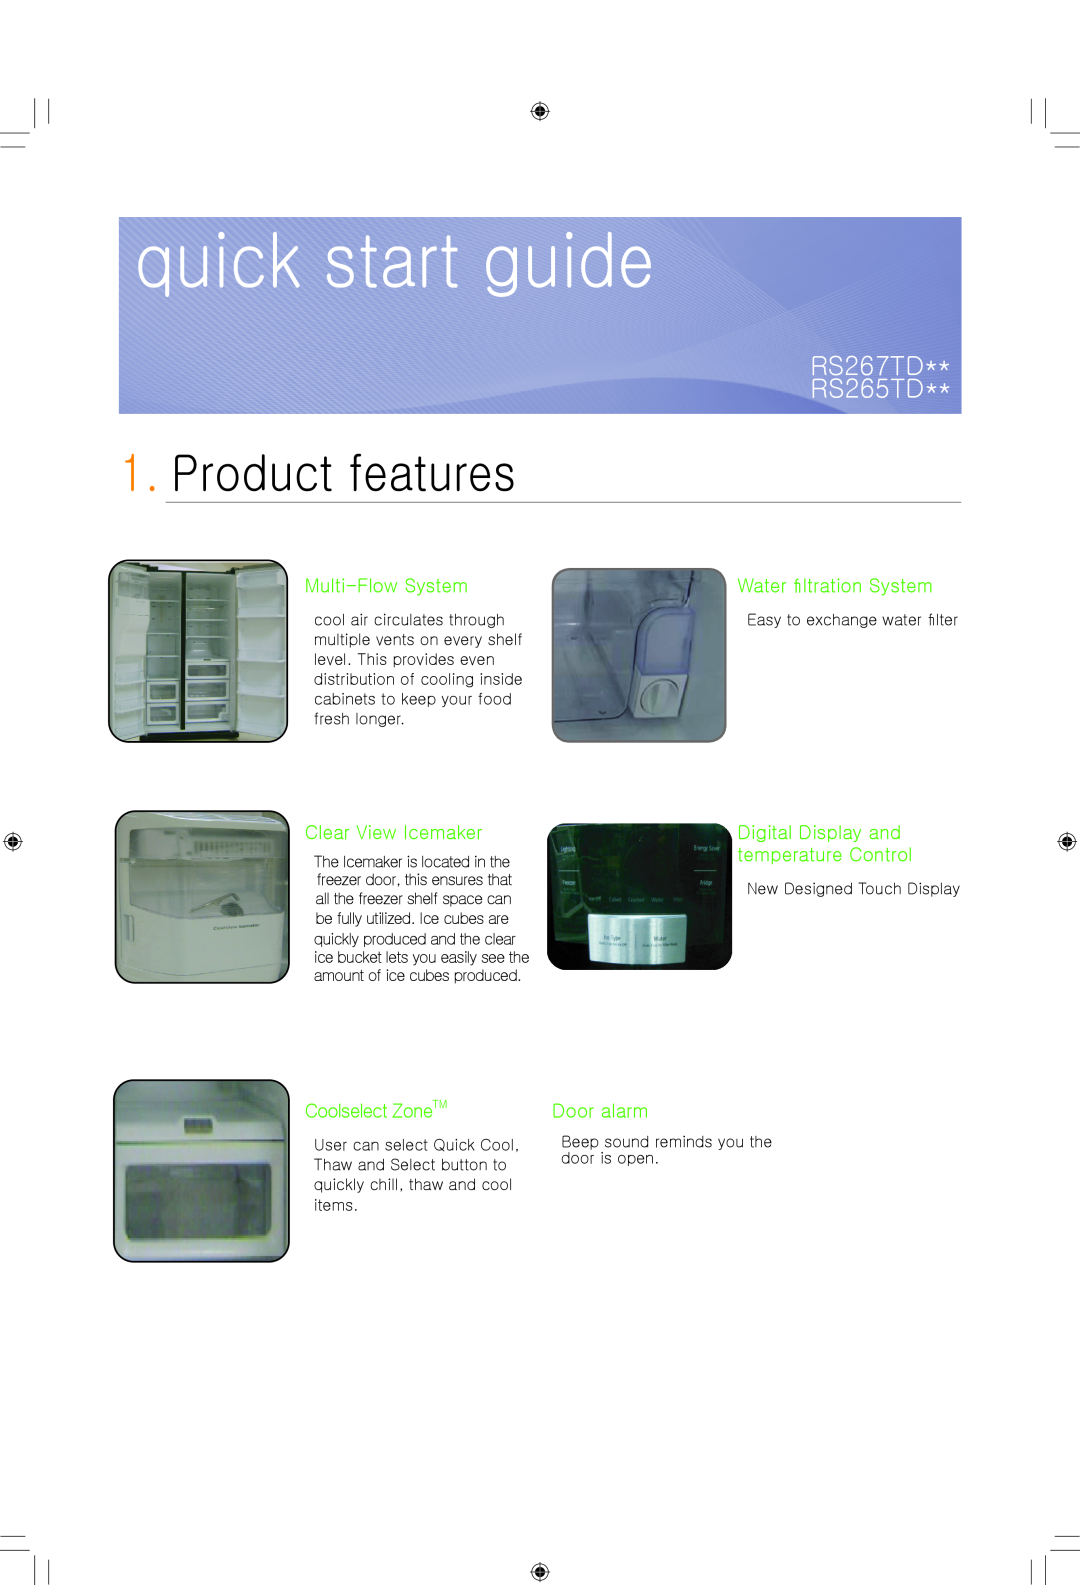 Samsung RS265TDBP quick start Product features, quick start guide, RS267TD RS265TD, Multi-Flow System, Clear View Icemaker 